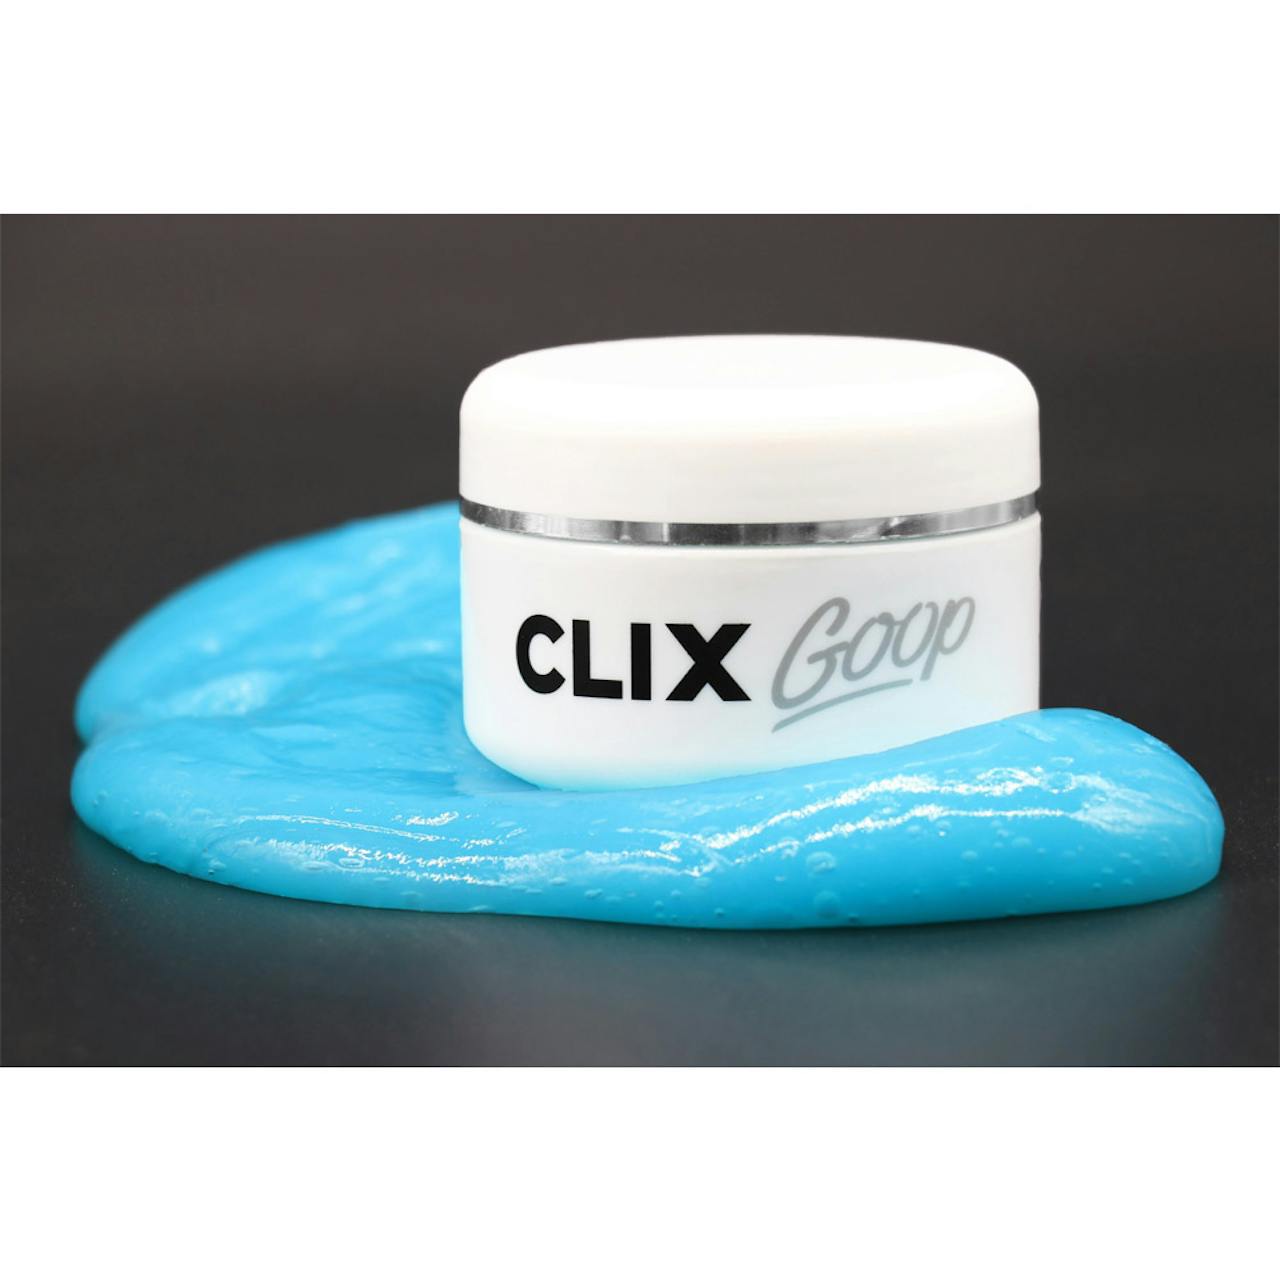 CLIX Goop - Car Cleaning Gel, Cleans Hard to Reach Places Like Vents,  Cupholders, Center Consoles, and More. Perfect for Car, Home, Office, and  Gifts!